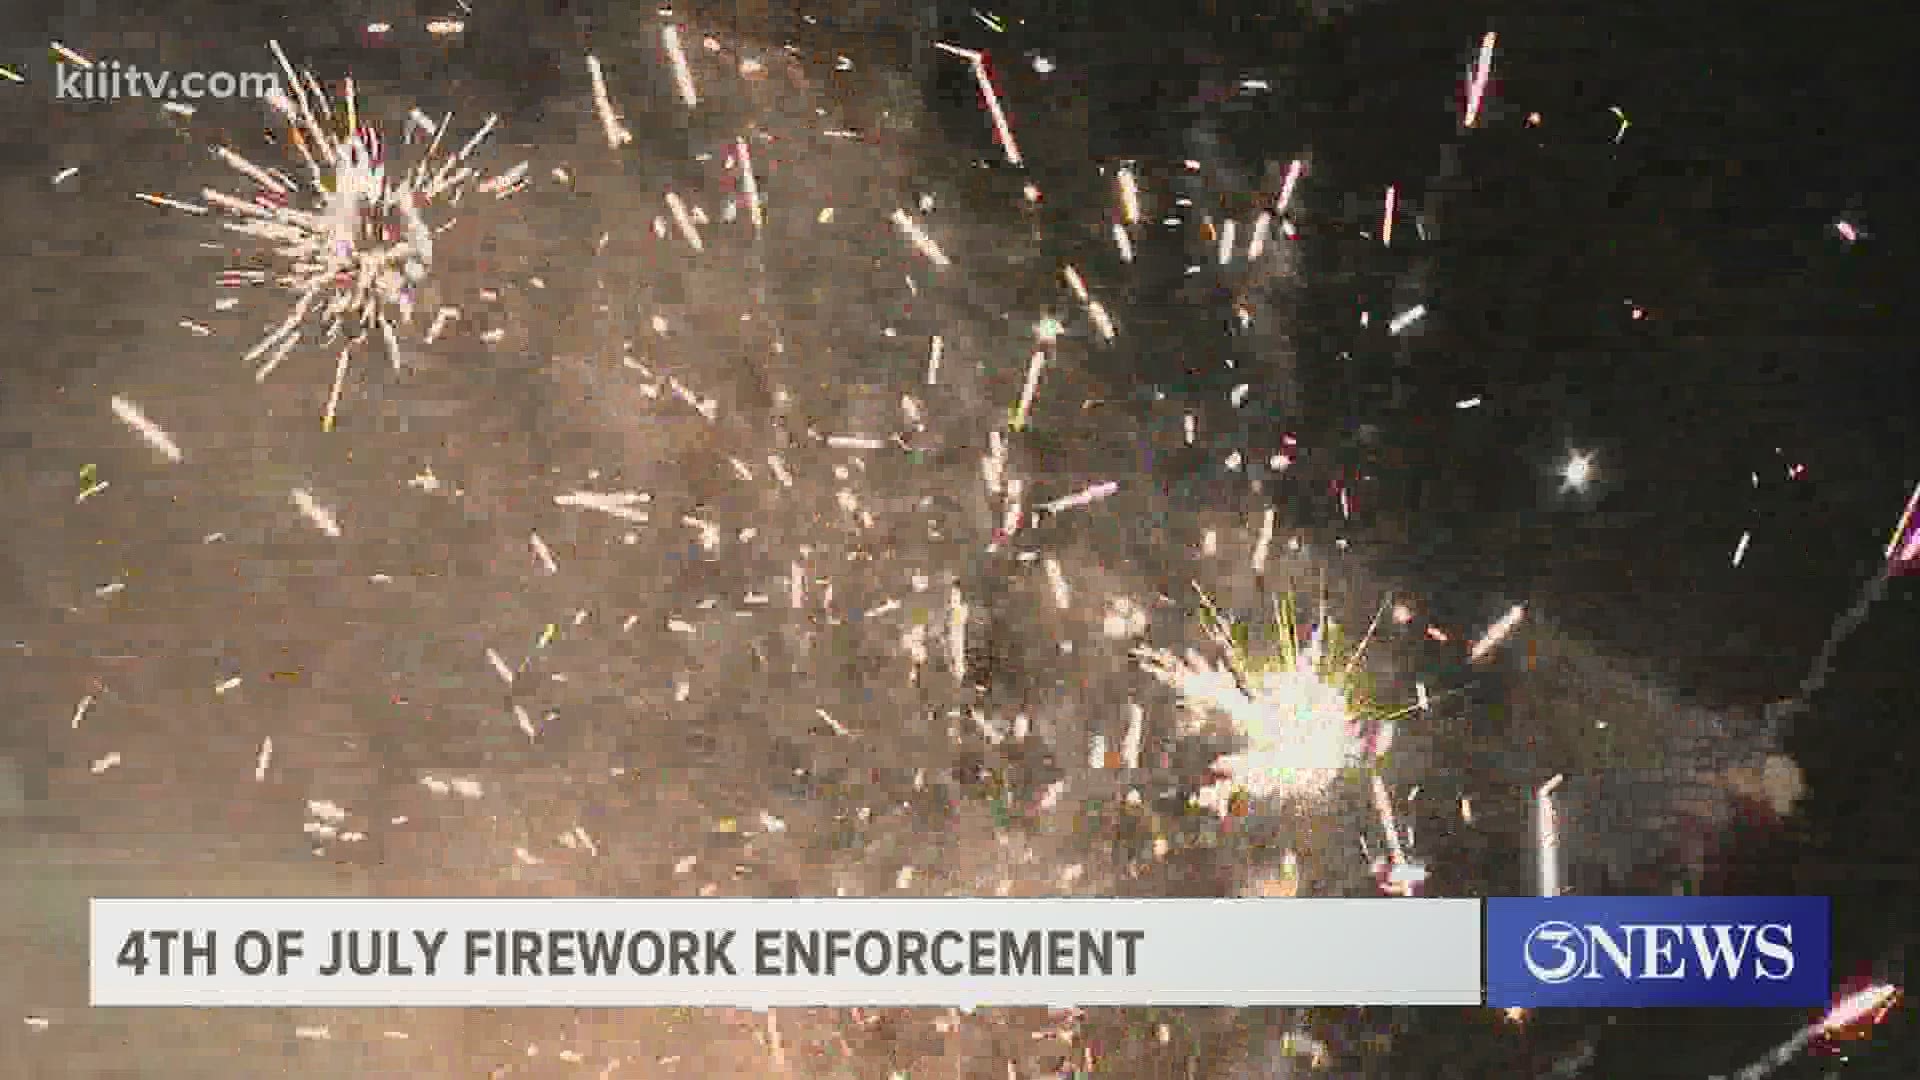 If caught, you could face a fine up to $2,000 per opened package of fireworks.